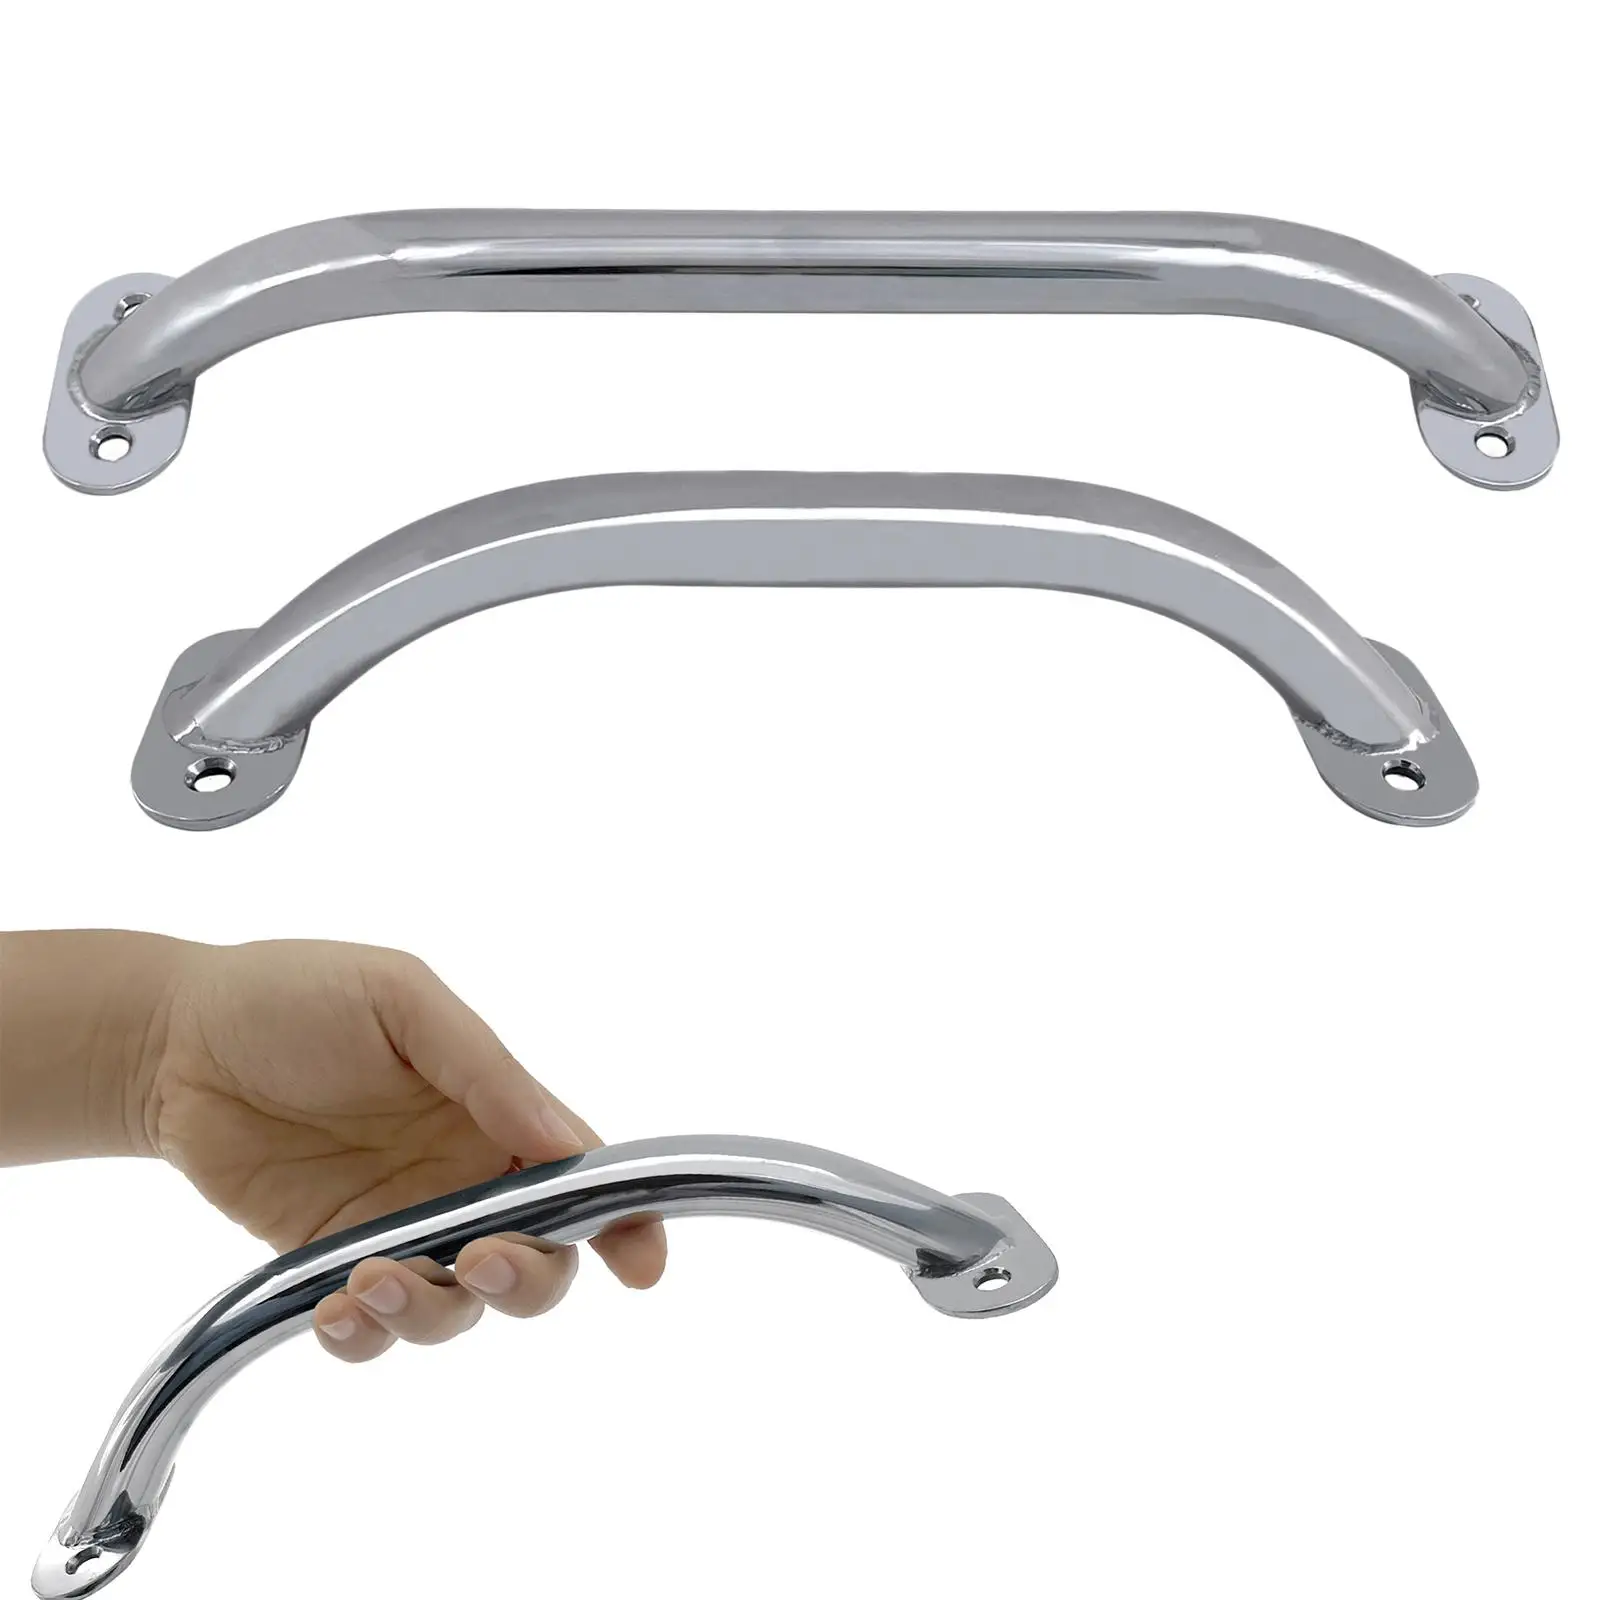 Stainless Steel Boat Grab Handle, Polished Marine Handrail, Hardware Grab Bar for Marine RV Yacht Boat Accessories